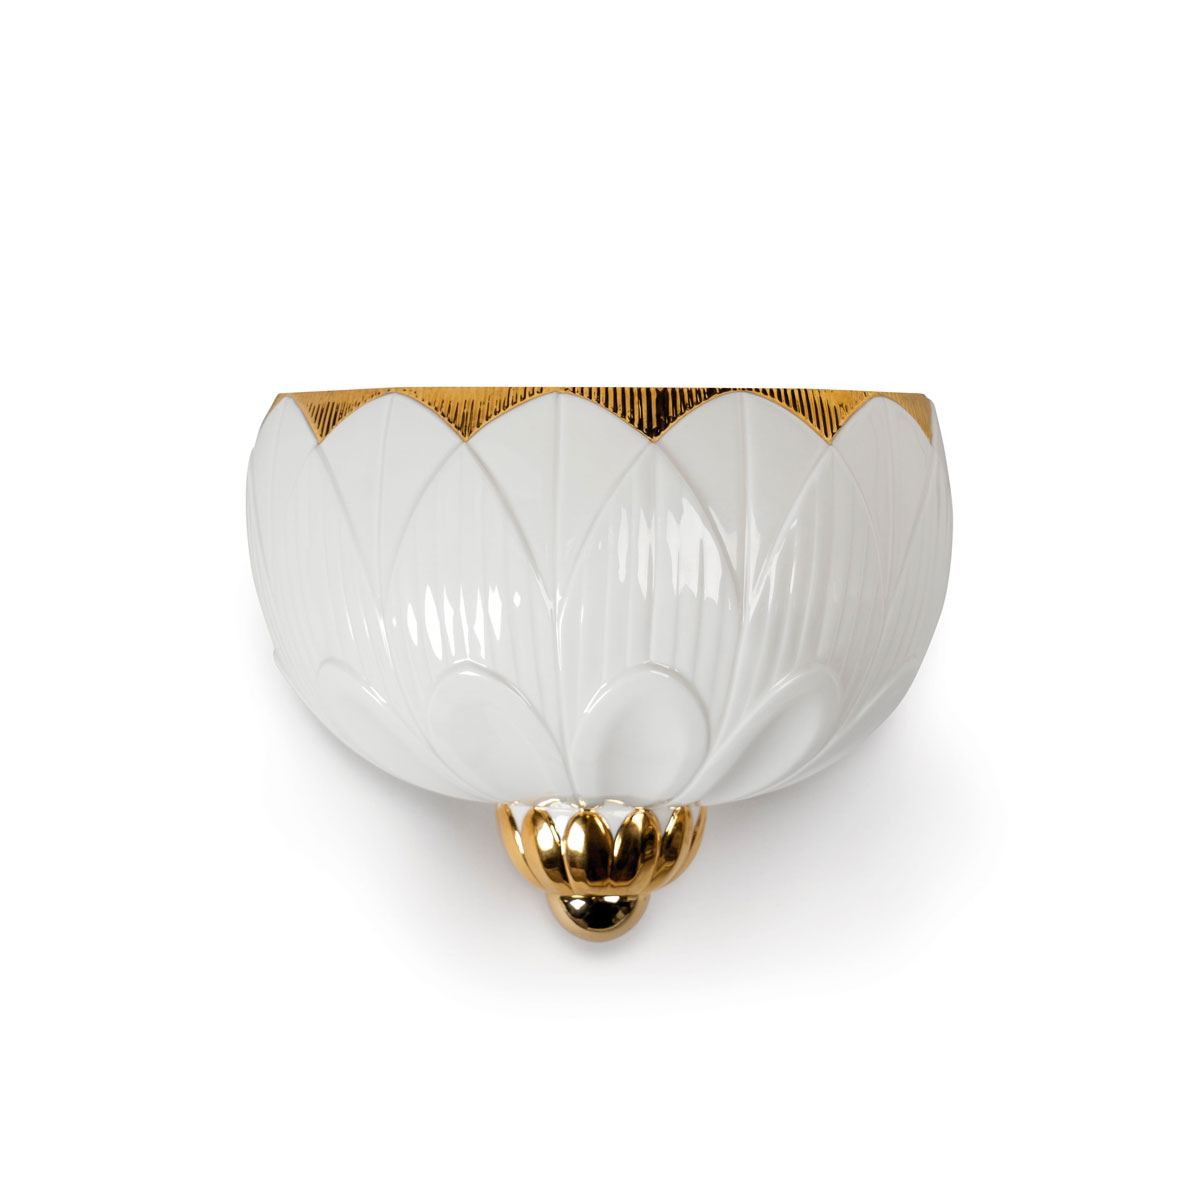 Lladro Classic Lighting, Ivy And Seed Wall Sconce. White And Gold.